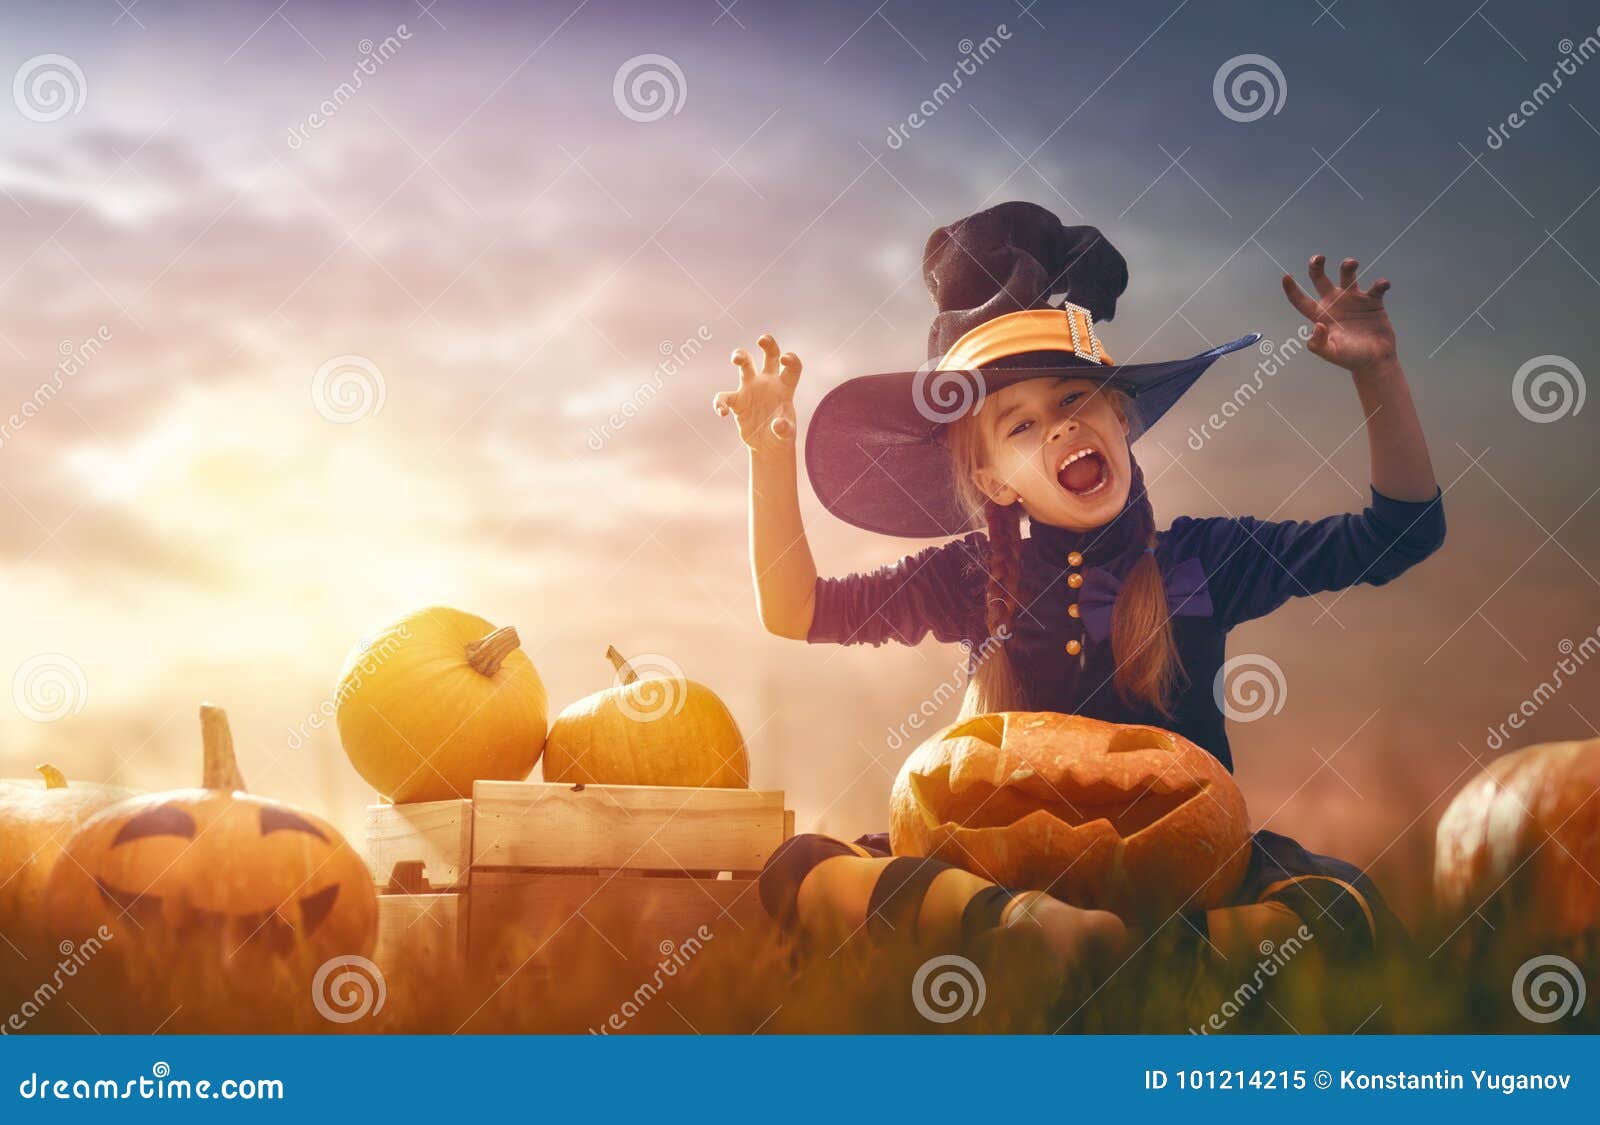 Witch with pumpkins stock image. Image of magical, people - 101214215